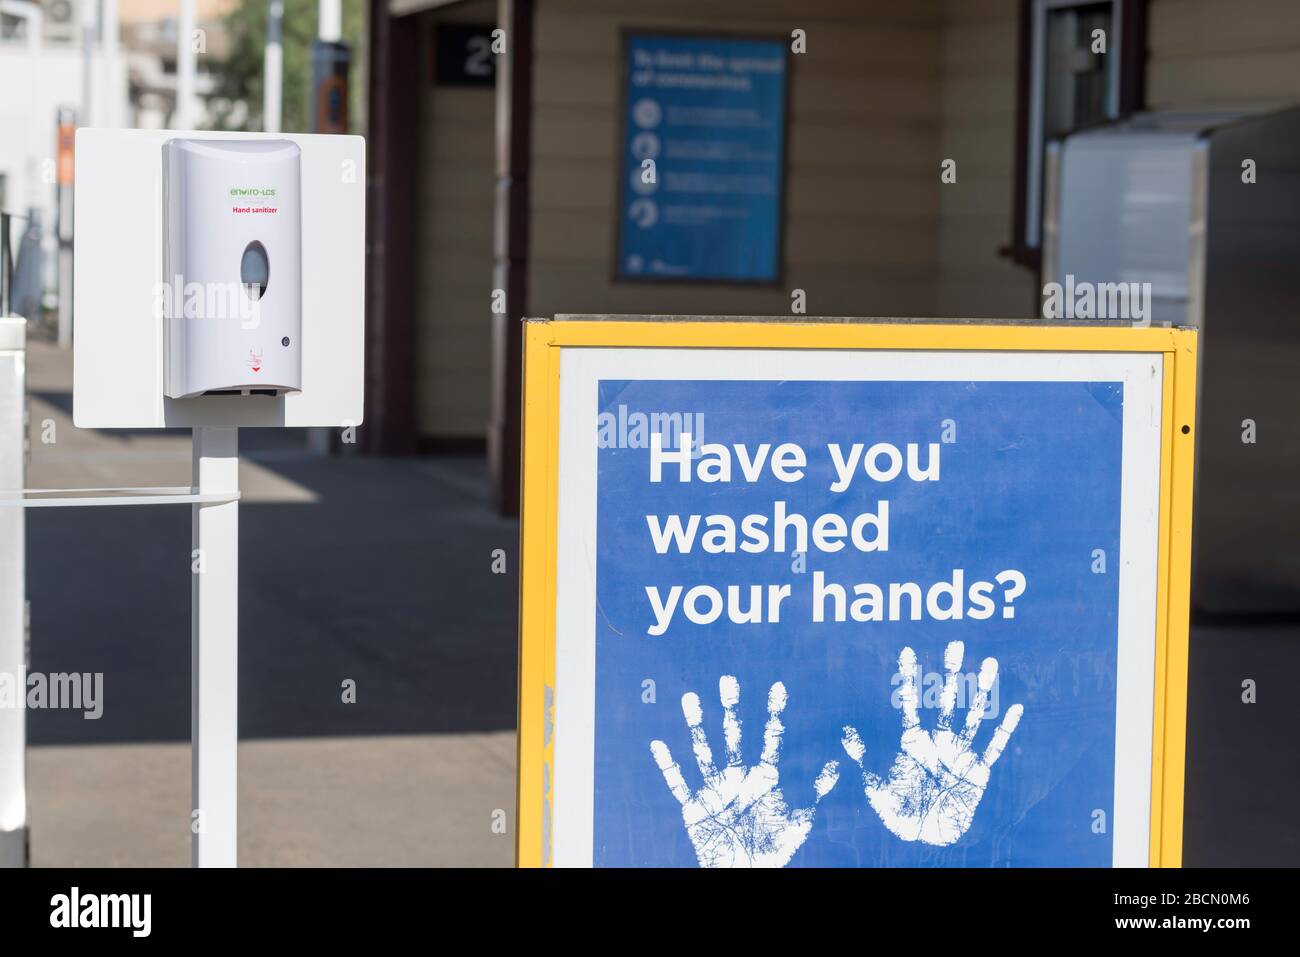 Sydney, Australia April 5, 2020: A state government issued 'Have you washed your hands?' sign and a no-touch spray-dose hand sanitiser at Gordon railway station in Sydney, New South Wales, Australia Stock Photo